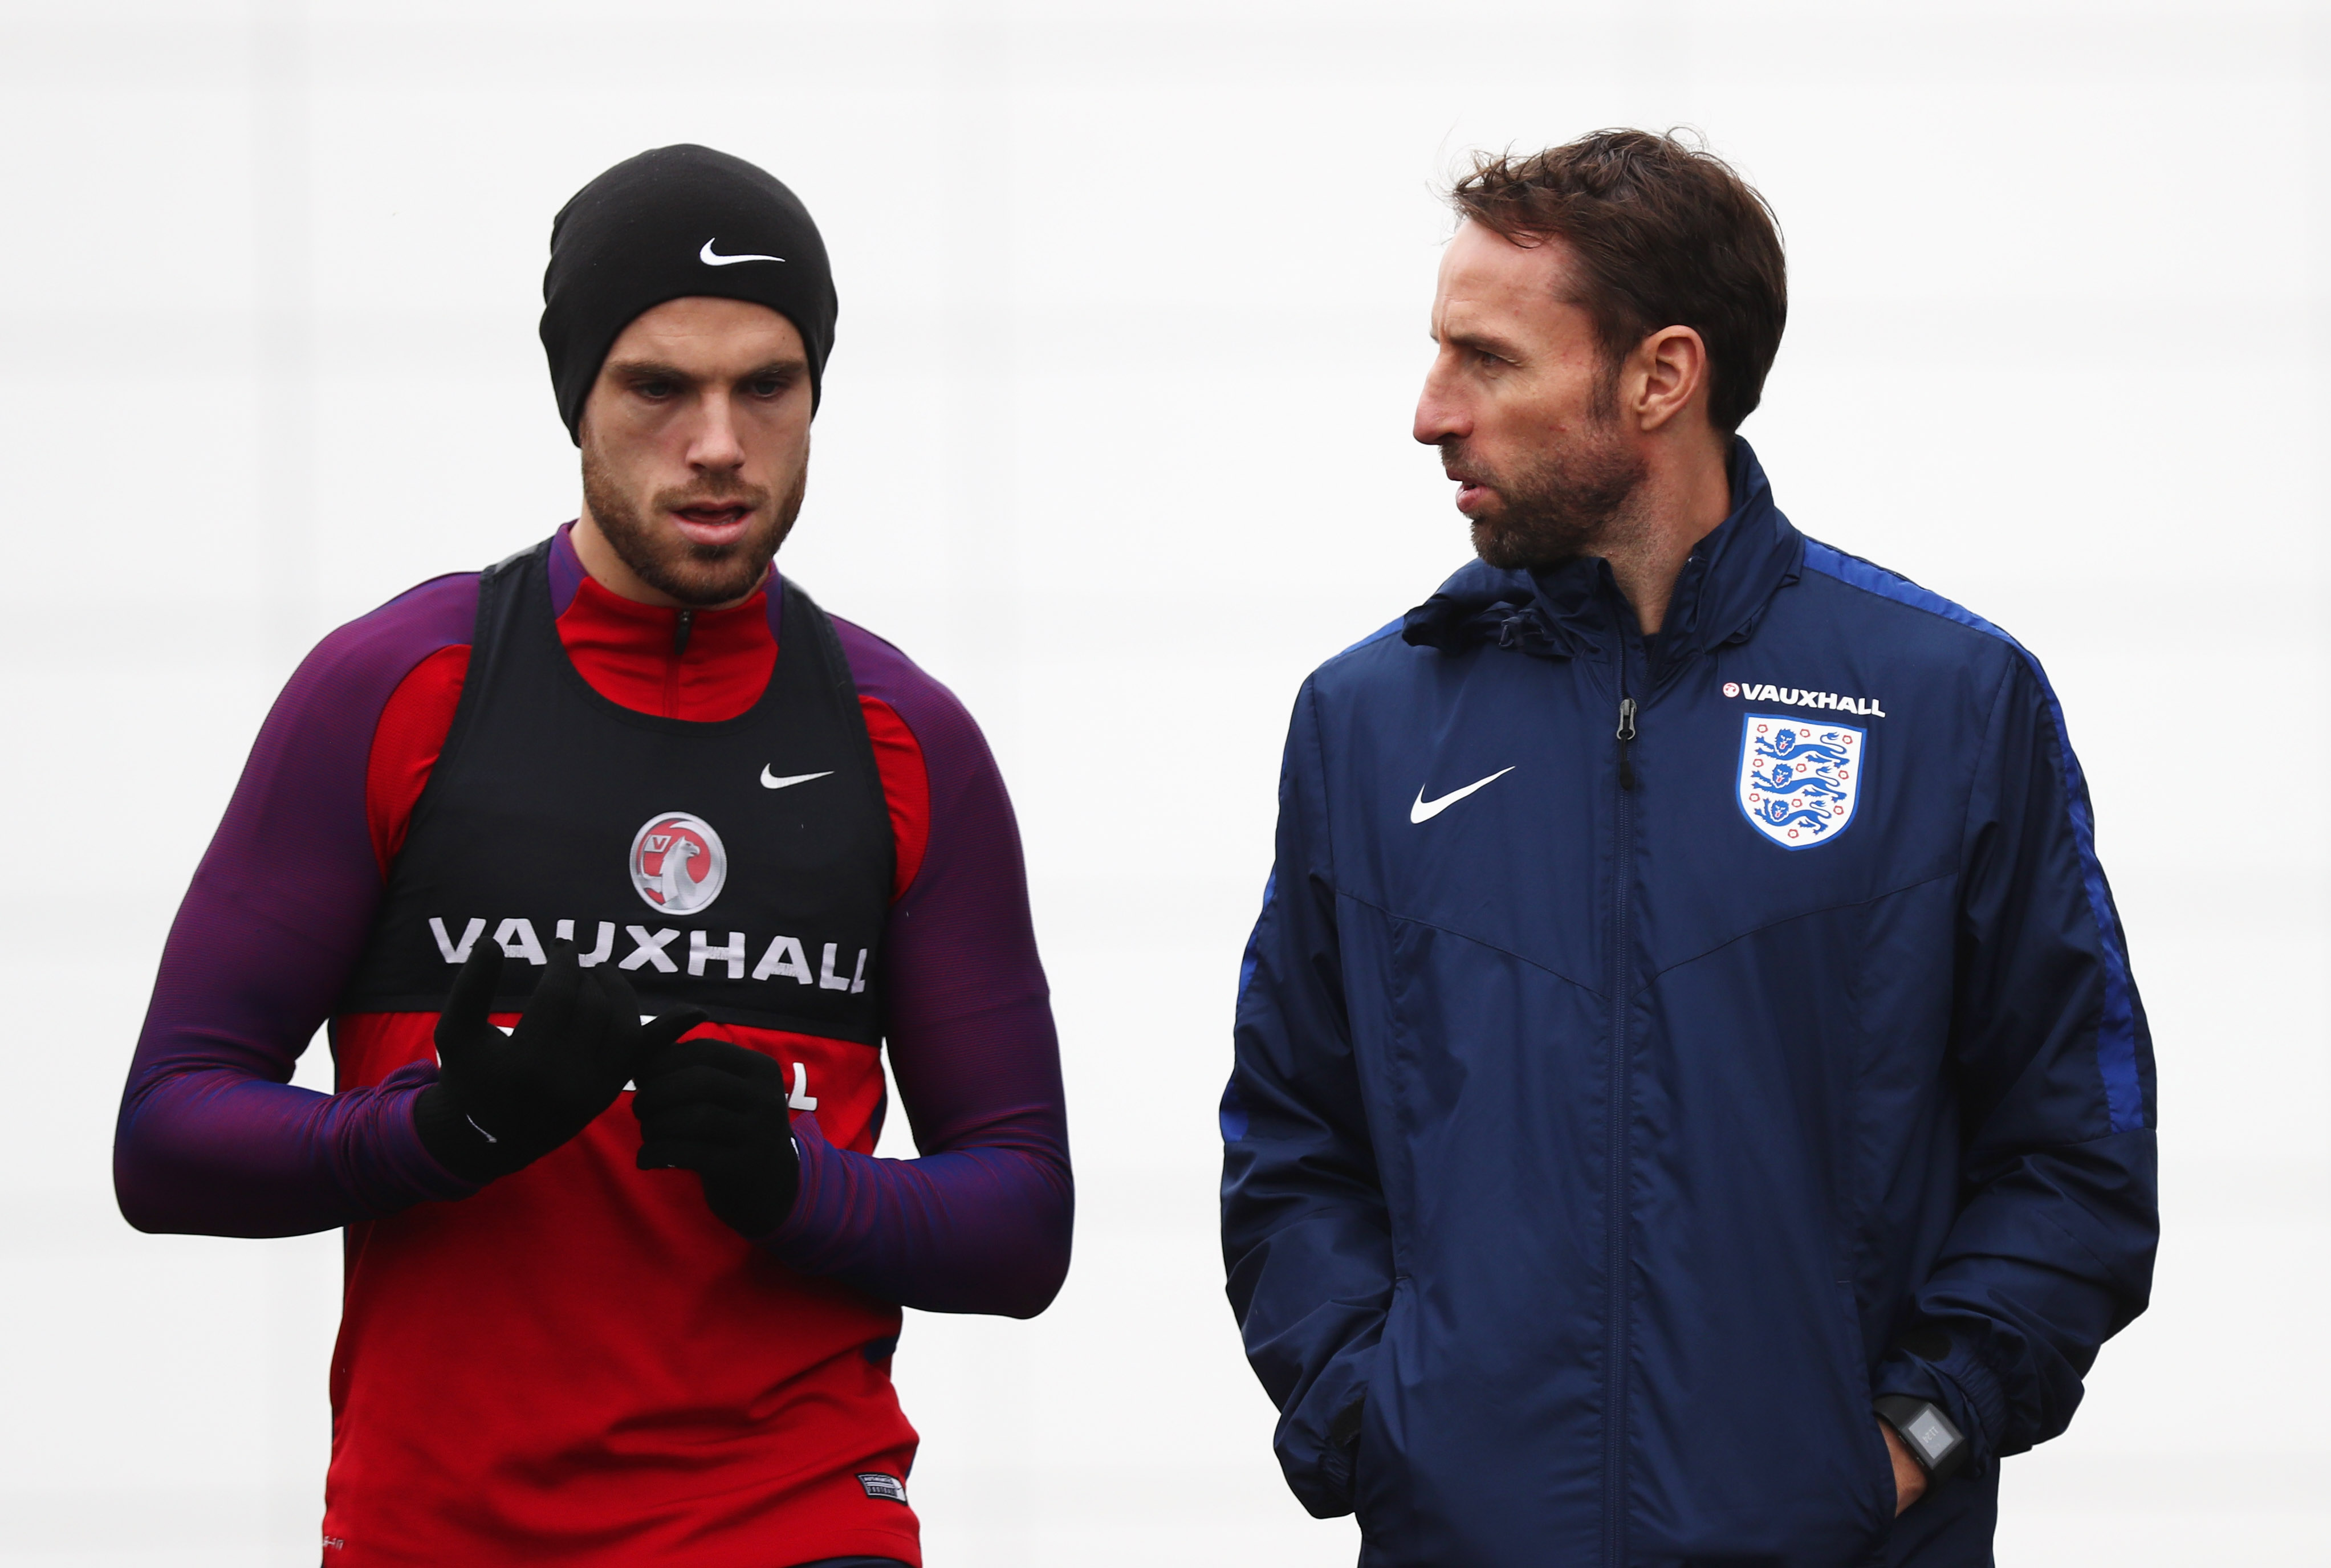 ENFIELD, ENGLAND - NOVEMBER 14:  Jordan Henderson and Gareth Southgate interim manager of England in discussion during an England training session on the eve of their international friendly match against Spain at Tottenham Hotspur Training Centre on November 14, 2016 in Enfield, England.  (Photo by Clive Rose/Getty Images)